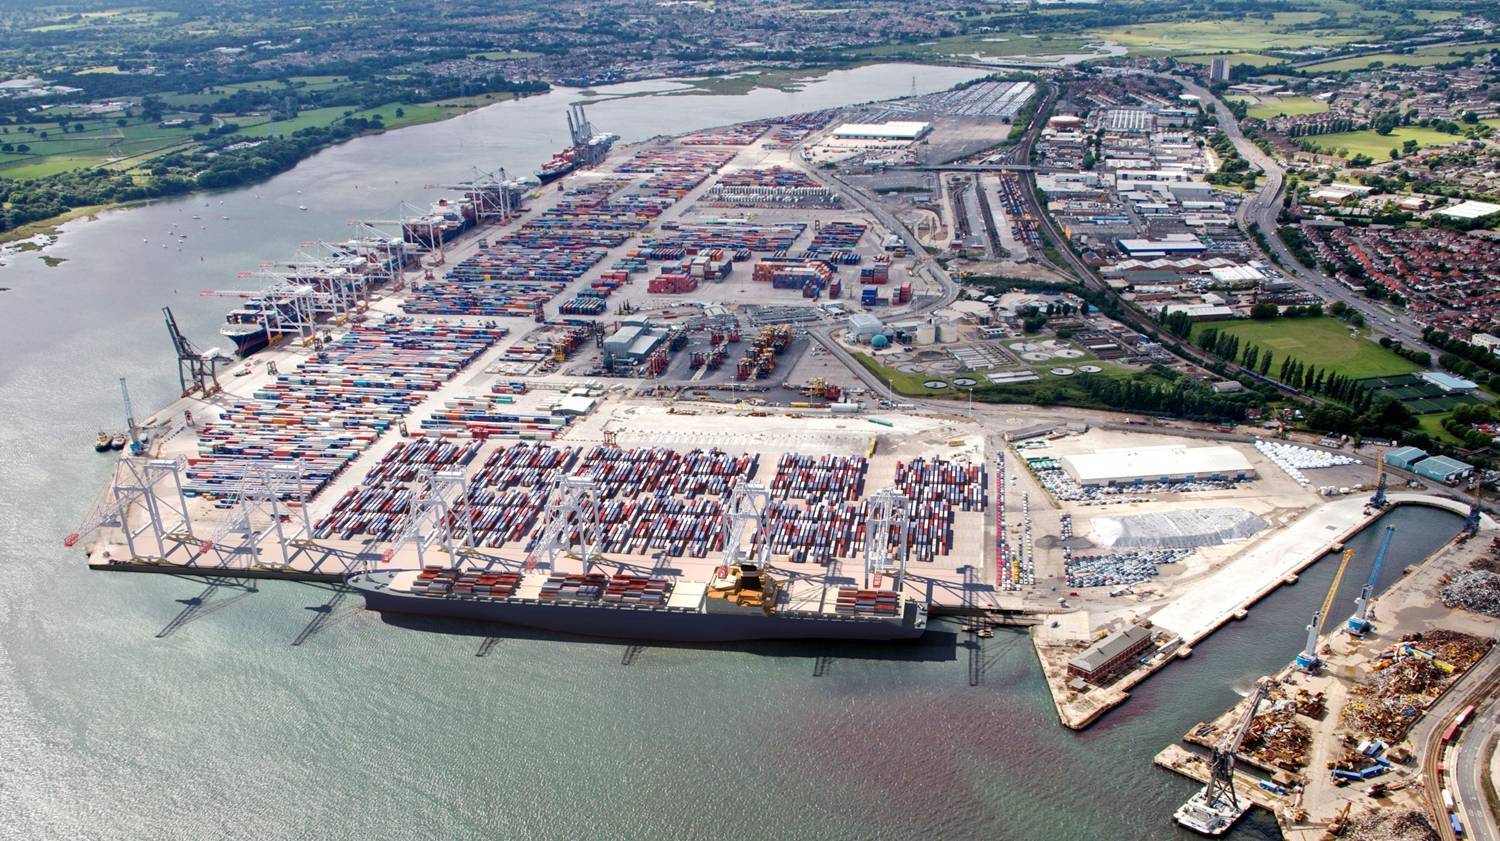 Aerial view of the King George V Dry Dock, Pumping Station and Container Port.